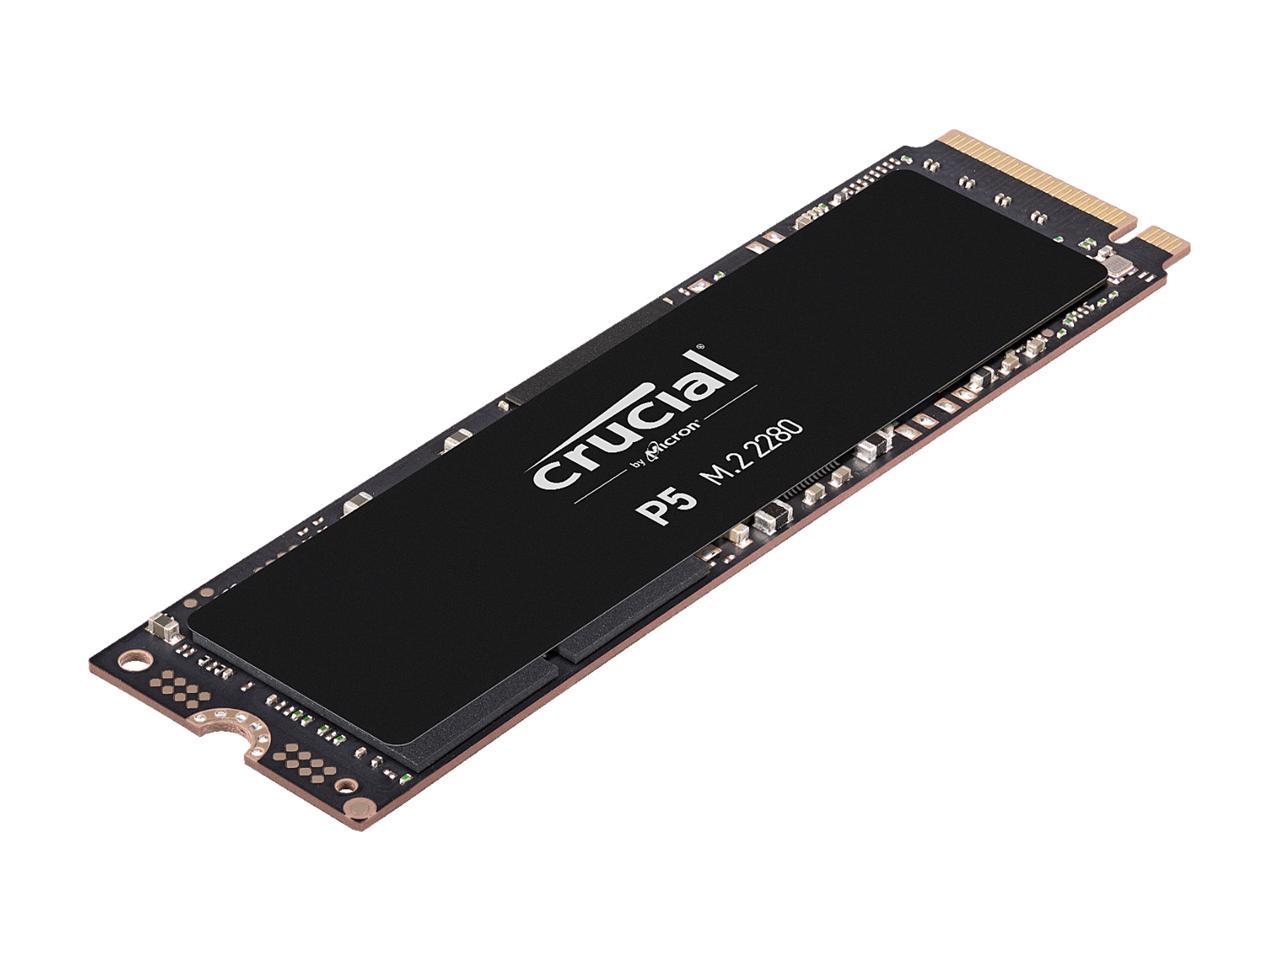 Crucial P5 1Tb 3D Nand Nvme Internal Ssd, Up To 3400 Mb/S - Ct1000P5Ssd8